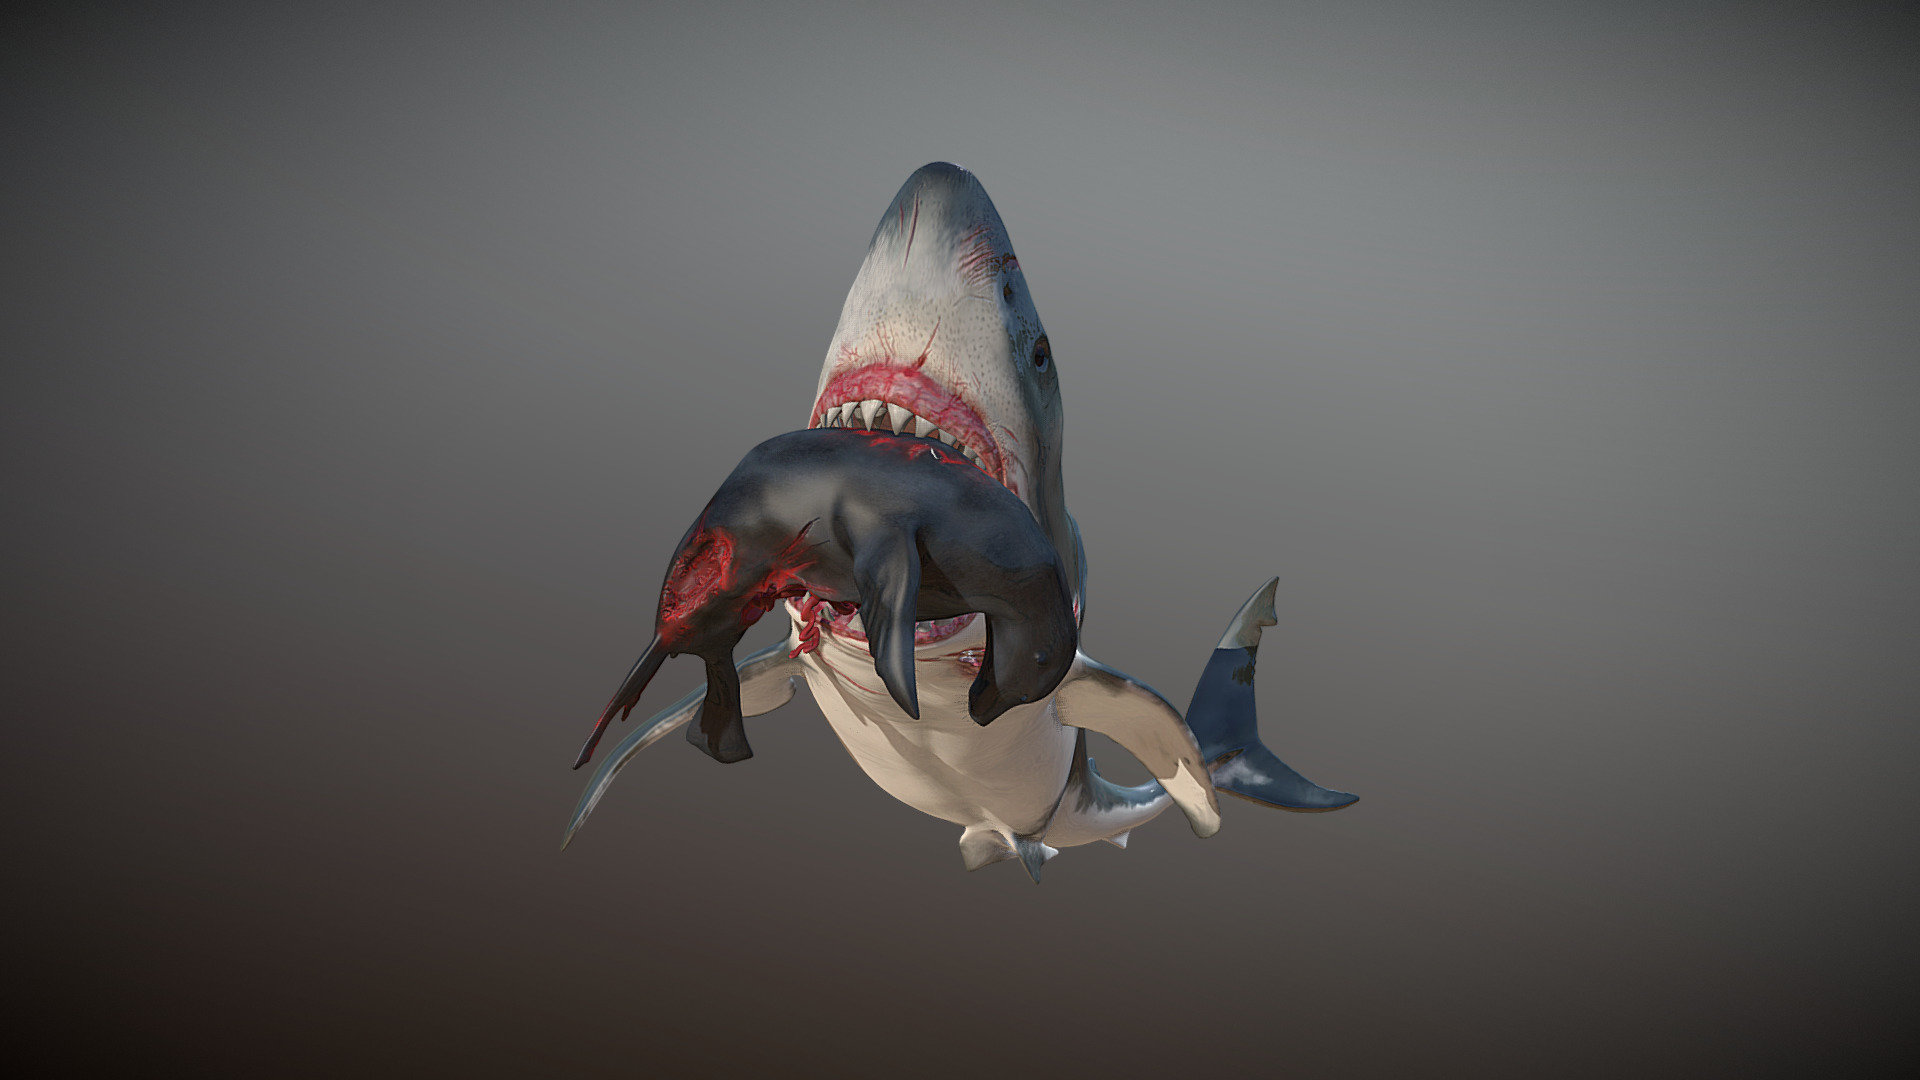 Showcase of my new Great White 3D model, attacking a seal in this iteration.
Model created in ZBrush and rigged for Maya/DAZ Studio/UE4, with several morphs and poses available.
Make sure to set the viewer in HD textures mode 3d model